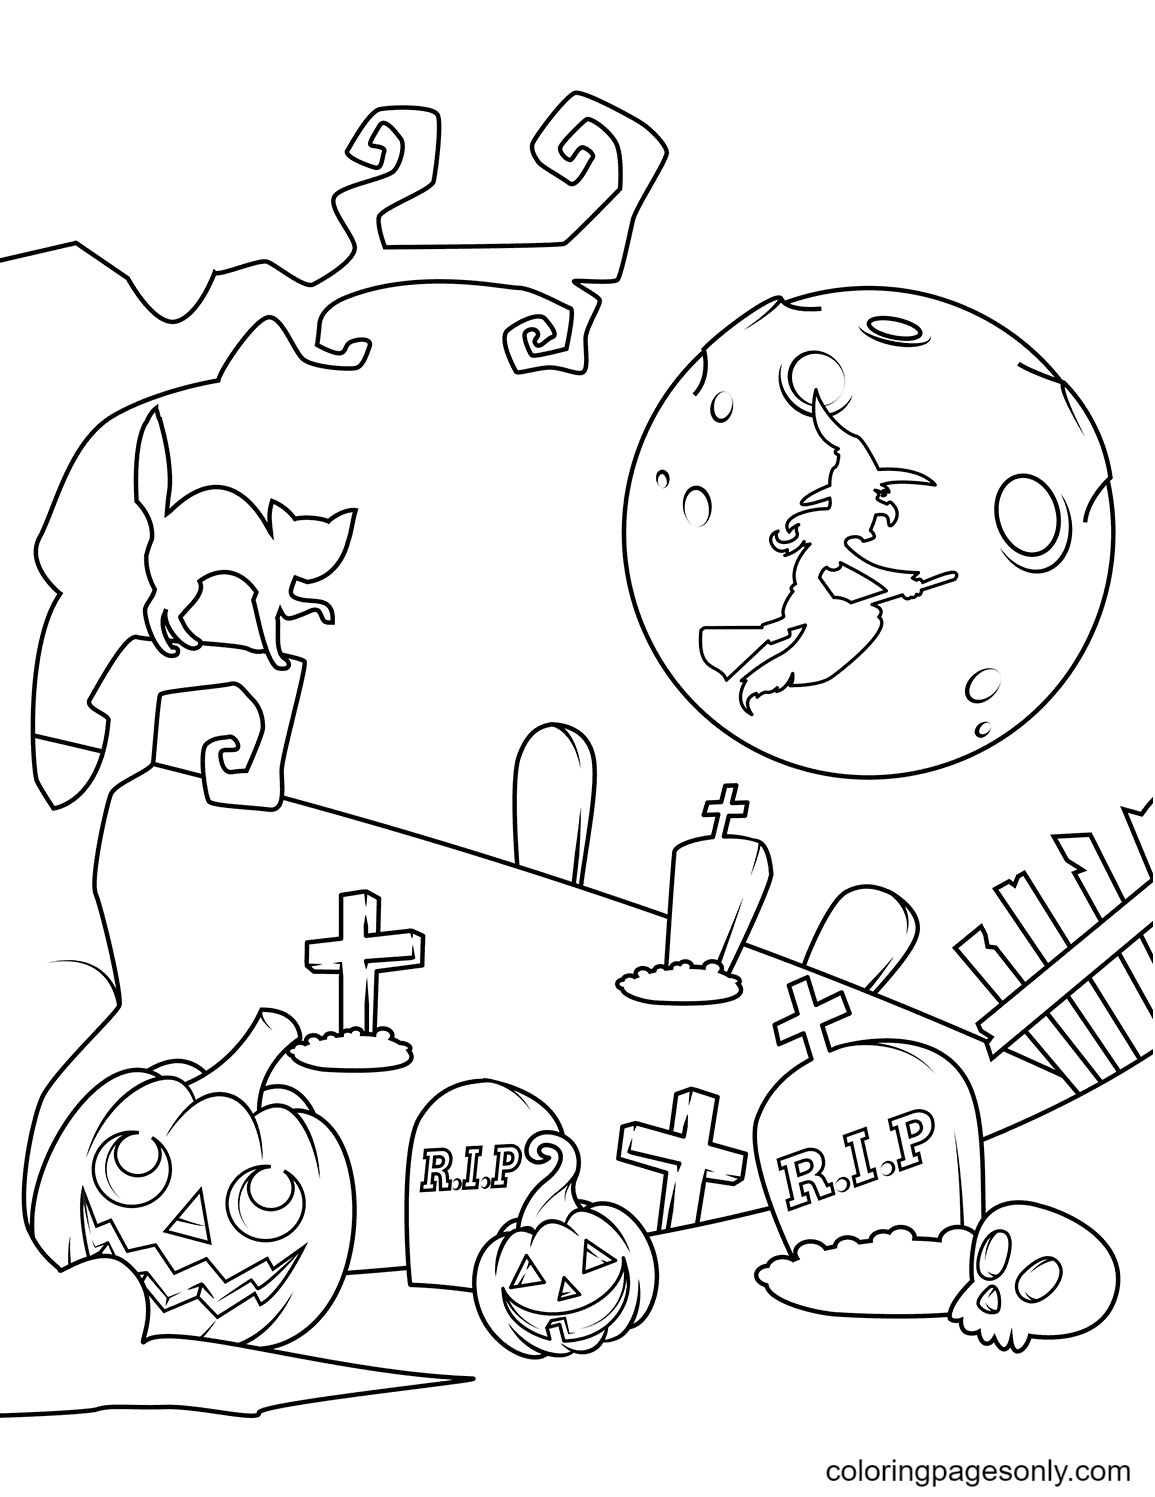 Cemetery with Jack O Lanterns Halloween Coloring Page